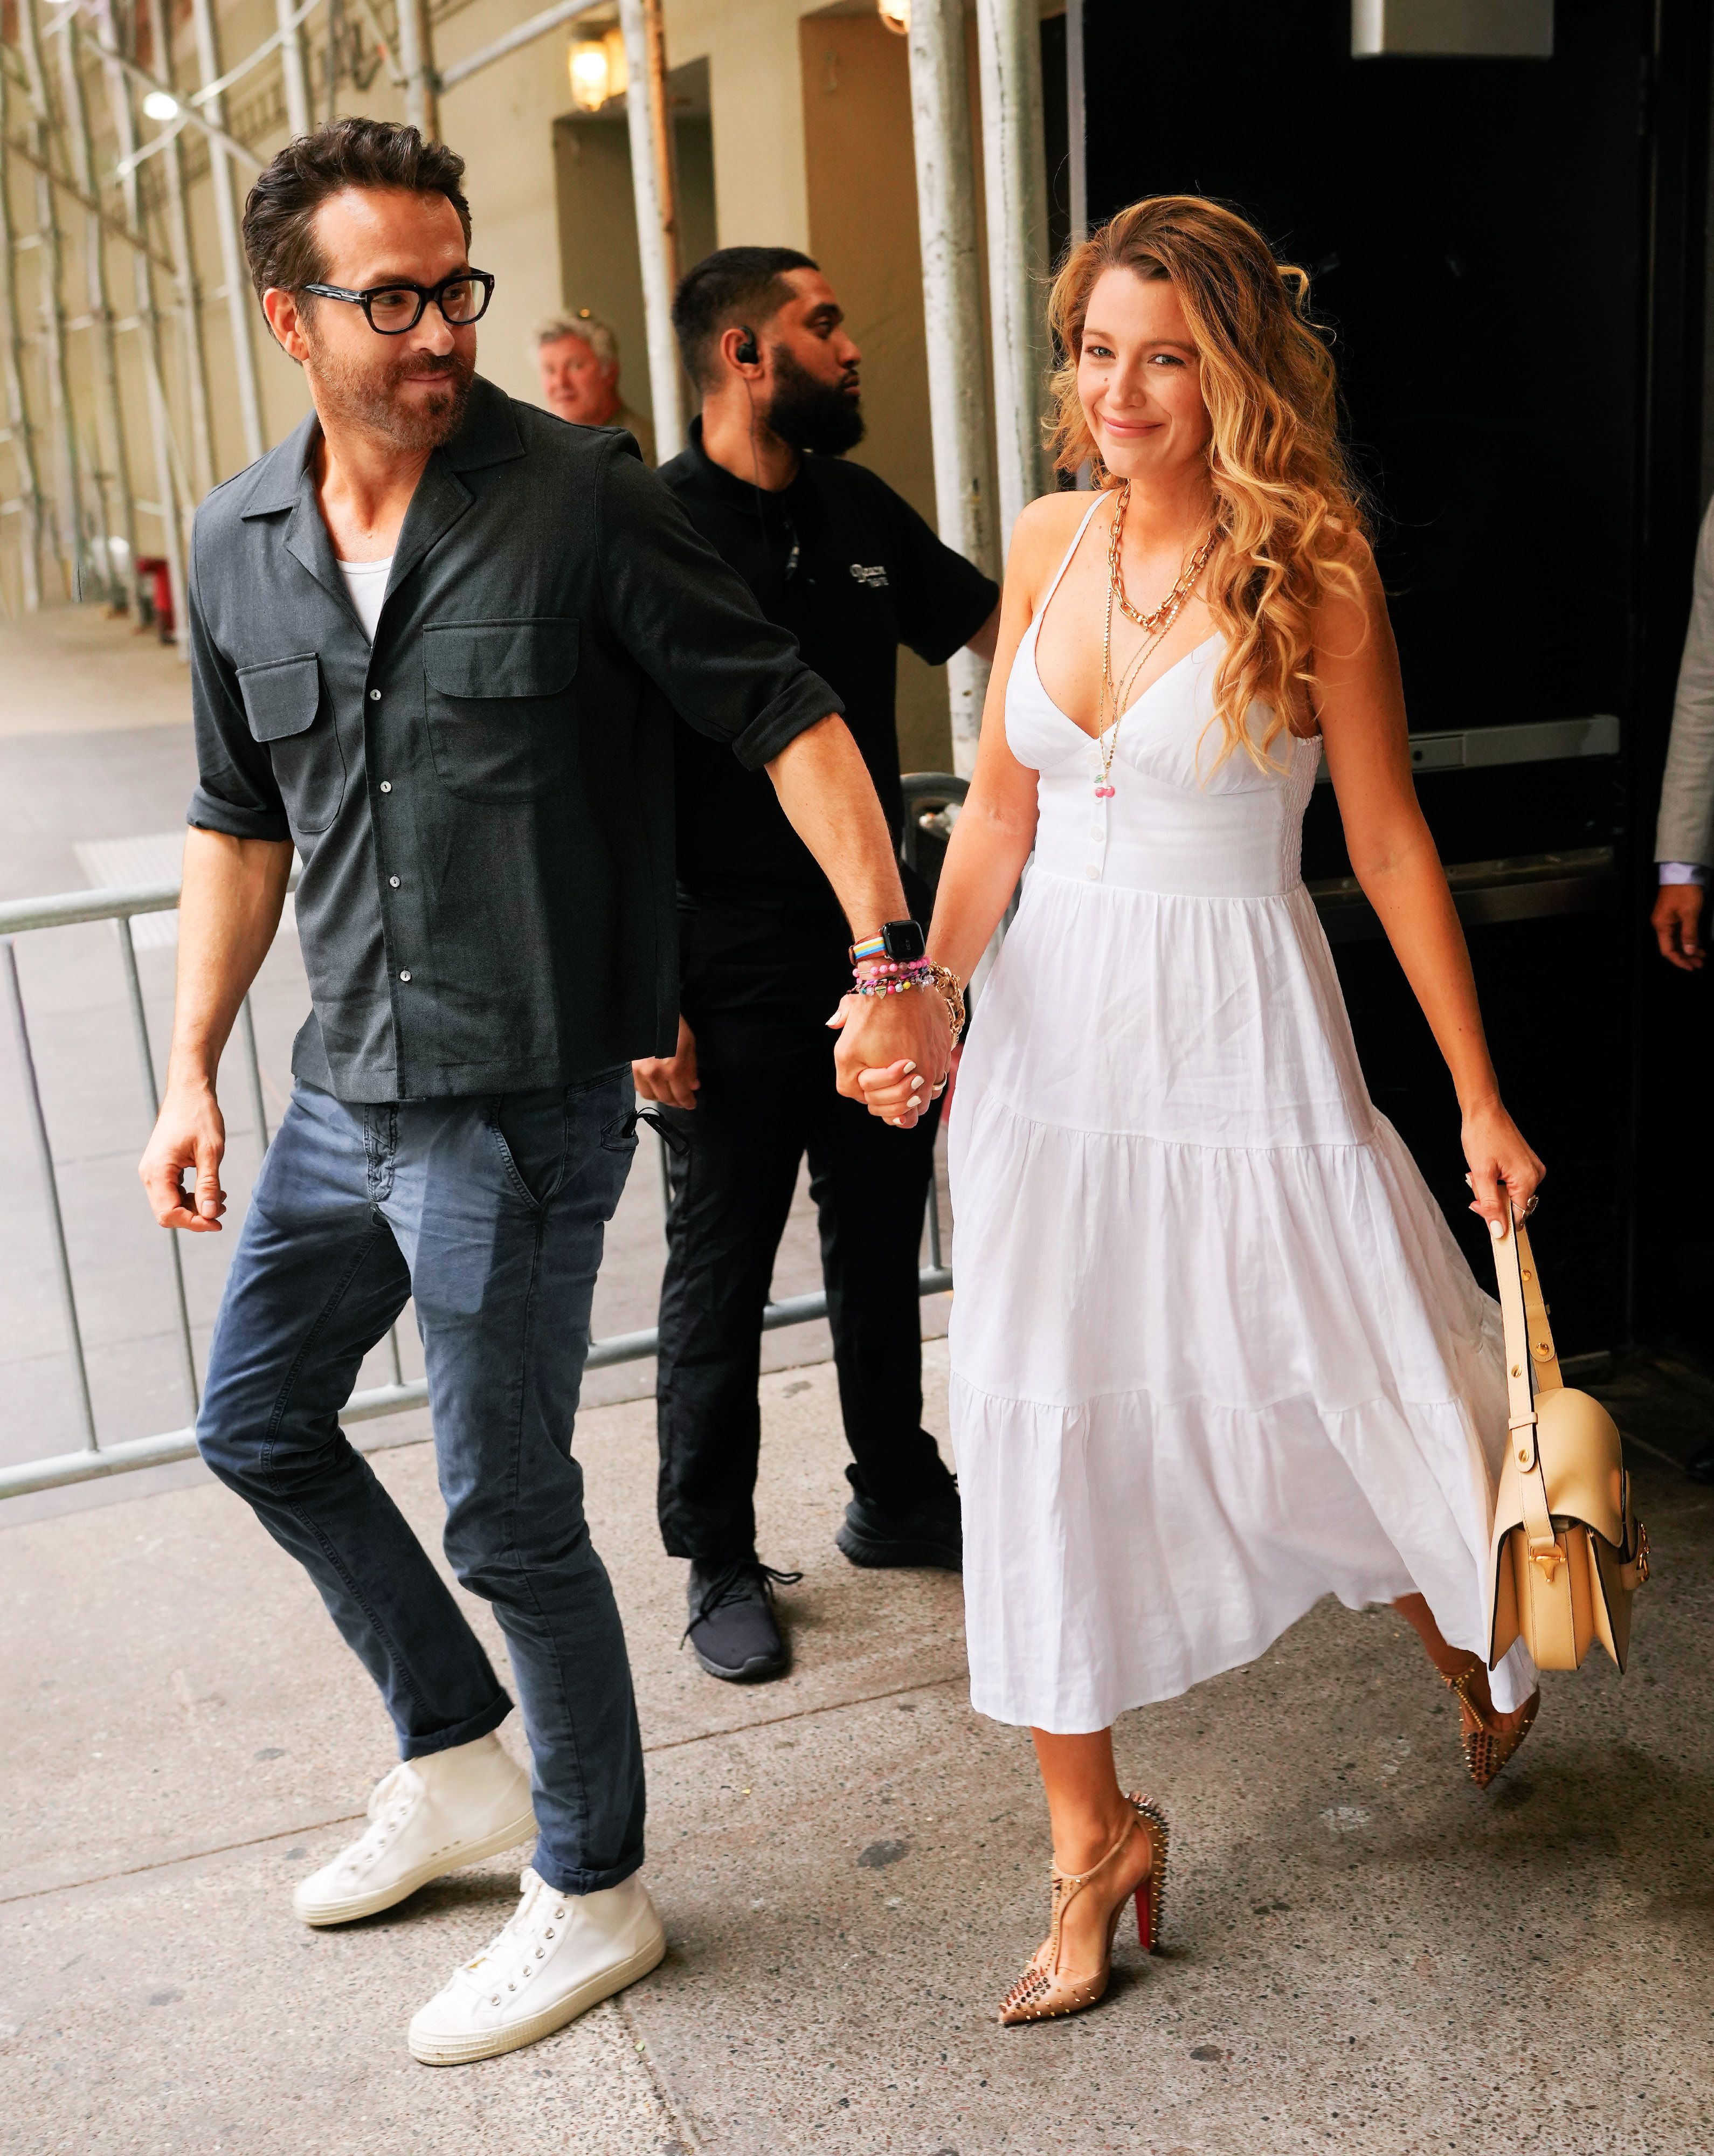 Blake Lively and Ryan Reynolds' four kids: All about their family